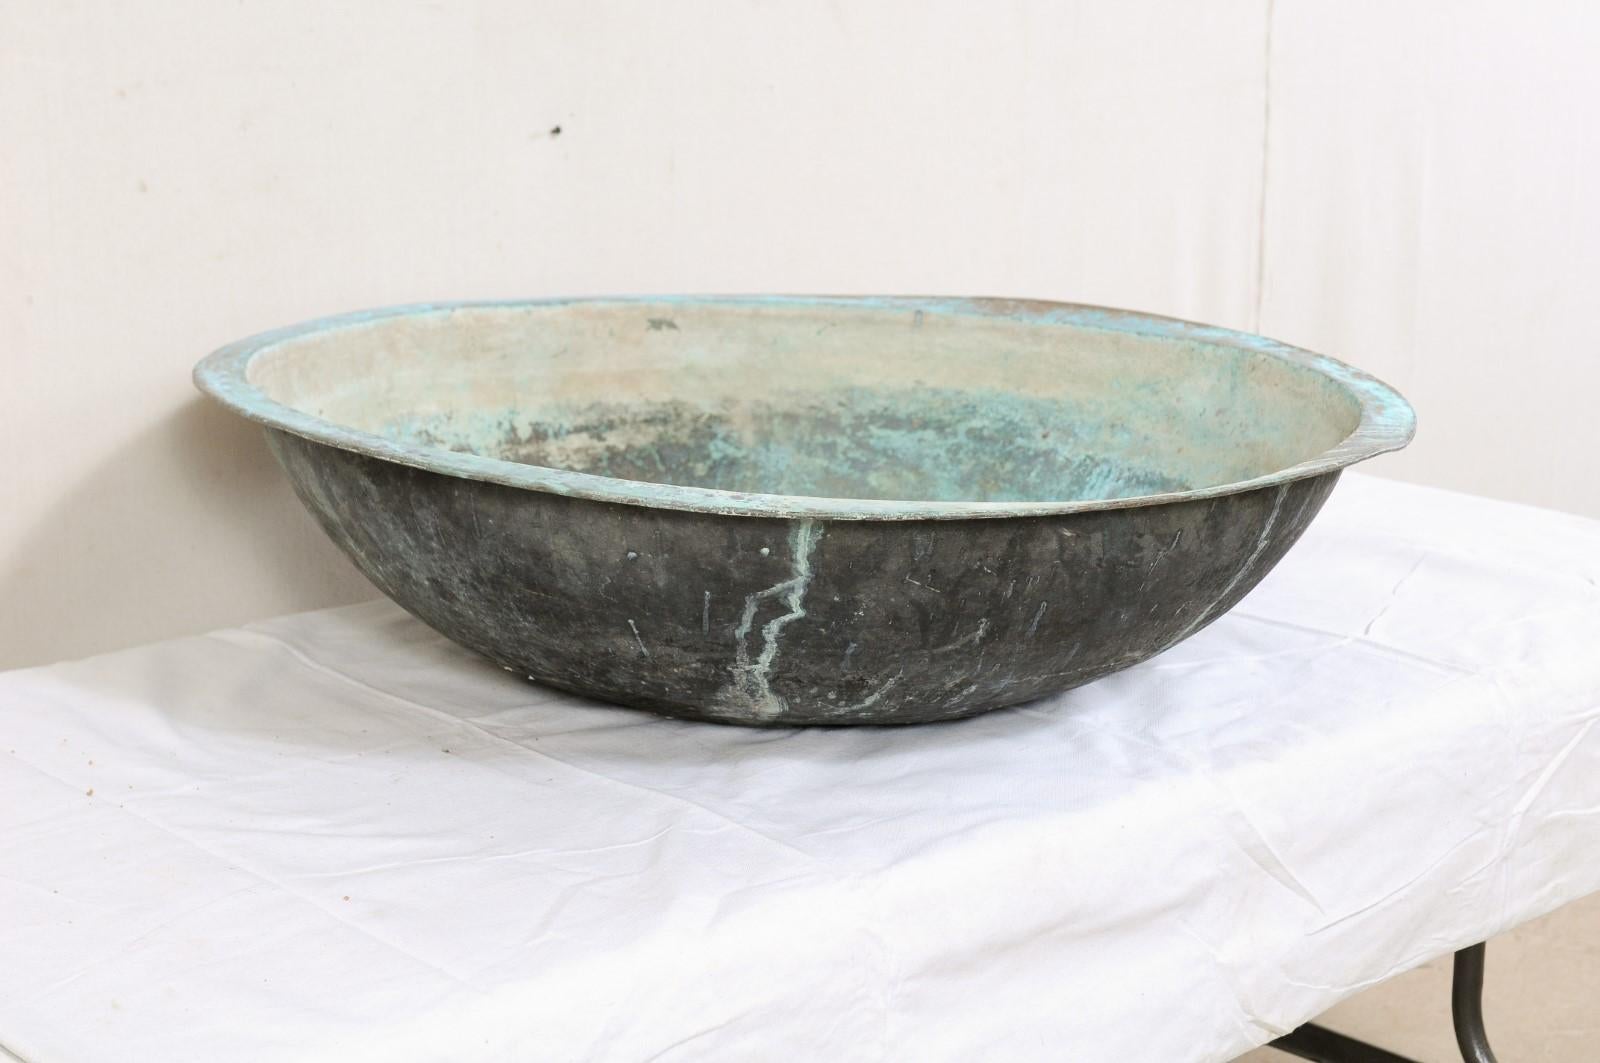 Patinated Antique Copper Bowl from Spain with Rich Blue-Green Patina